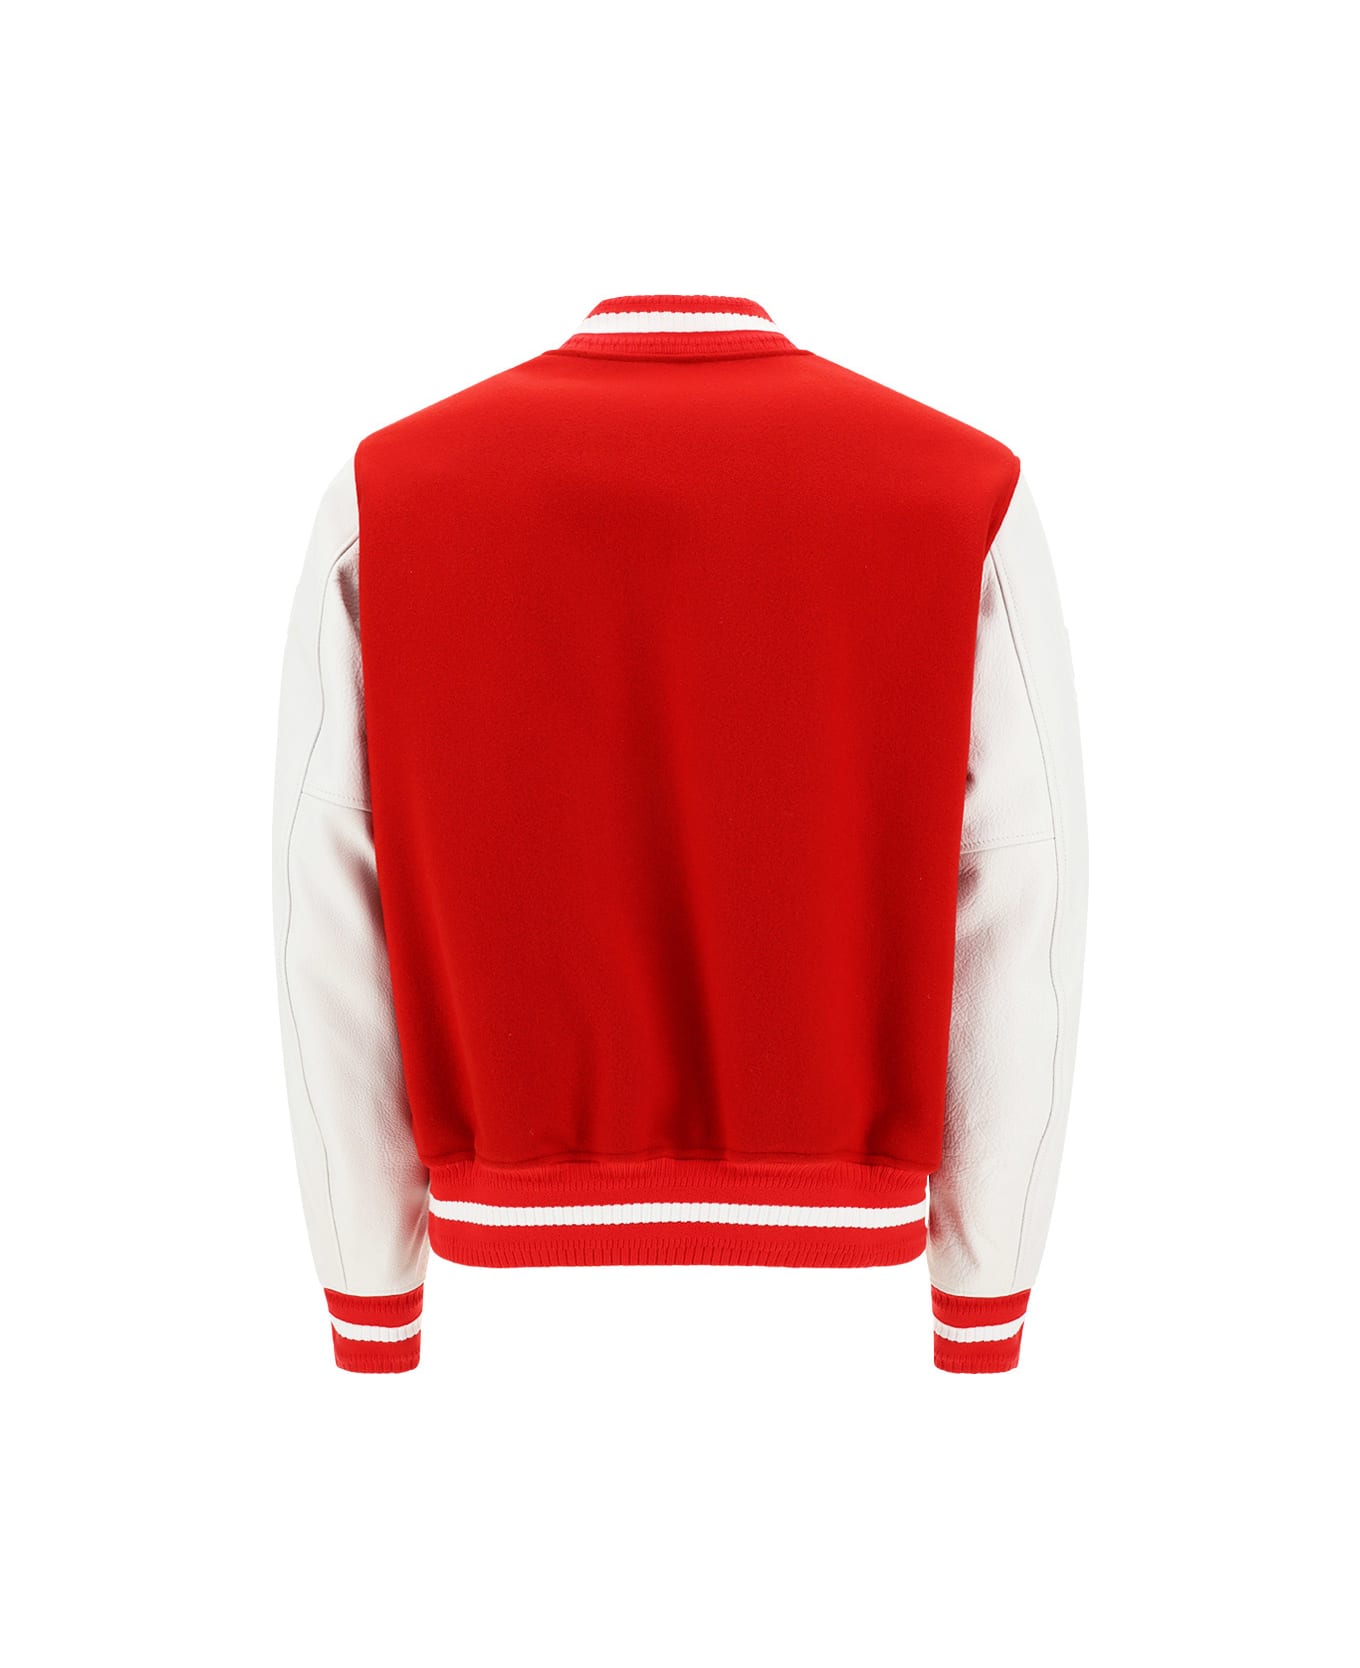 Givenchy Varsity College Jacket - White/red